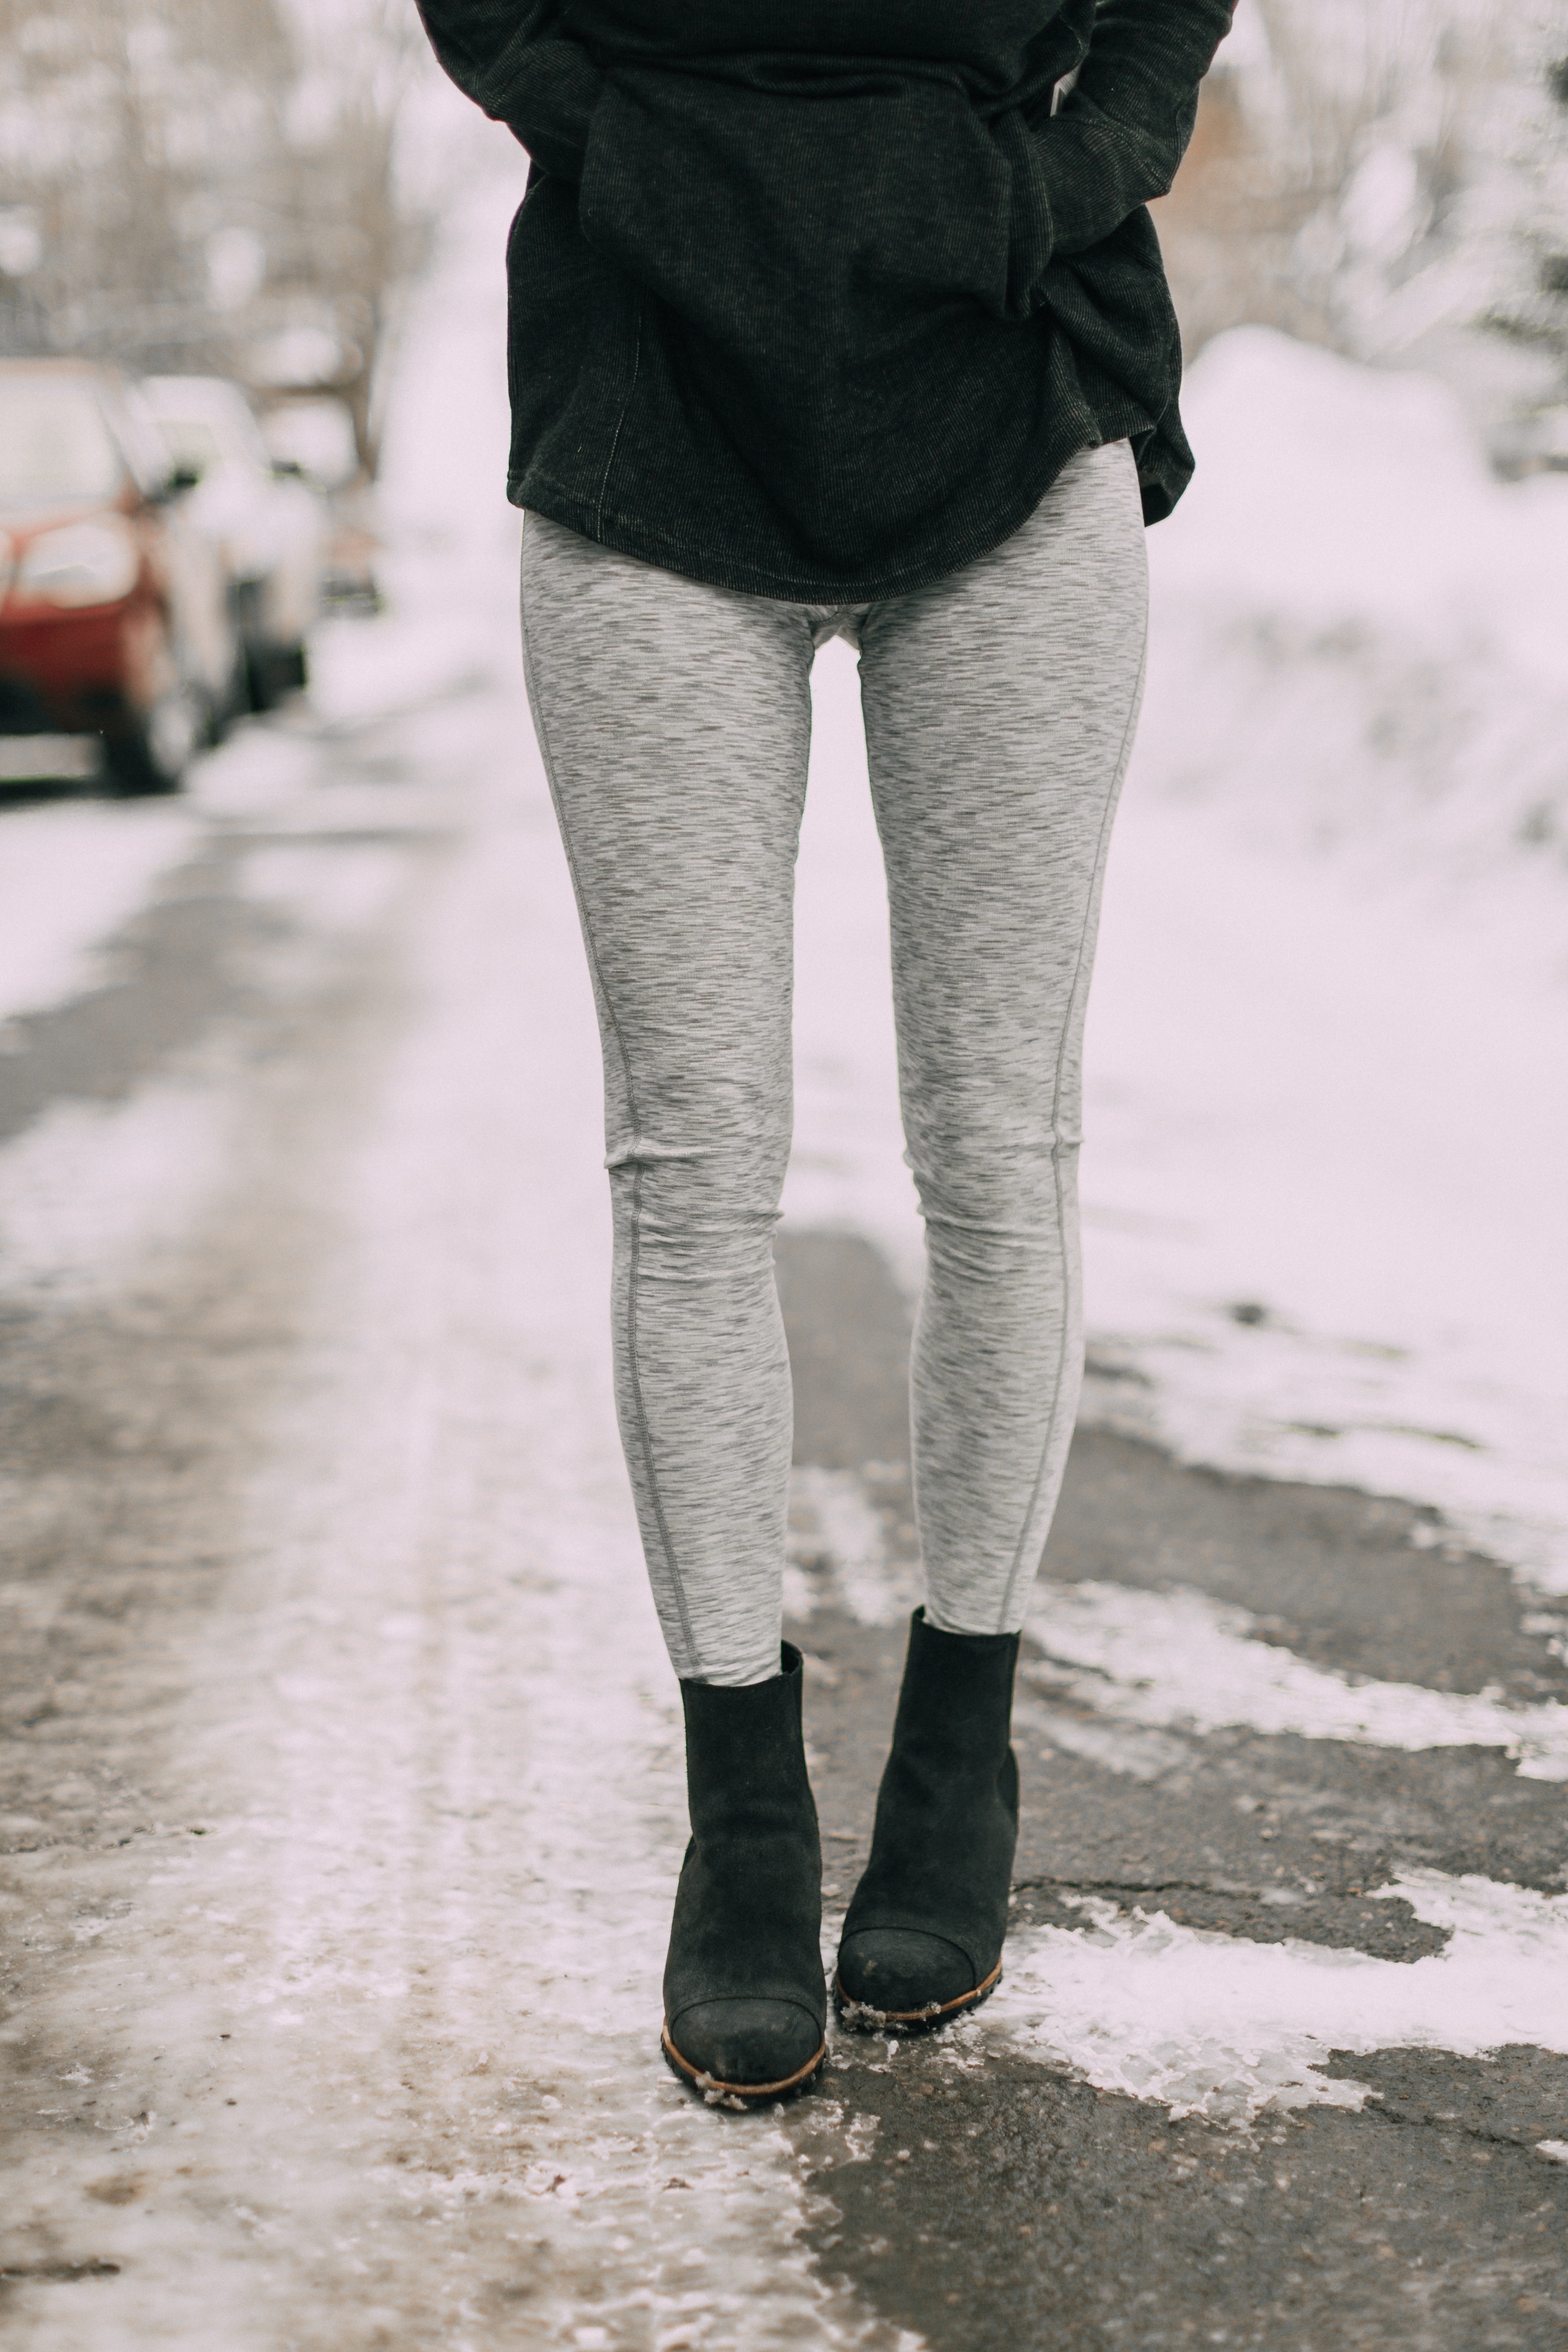 Reversible Leggings, Fashion blogger erin busbee of busbeestyle.com wearing the reversible printed leggings and funnel neck tunic from Jockey in Telluride, CO